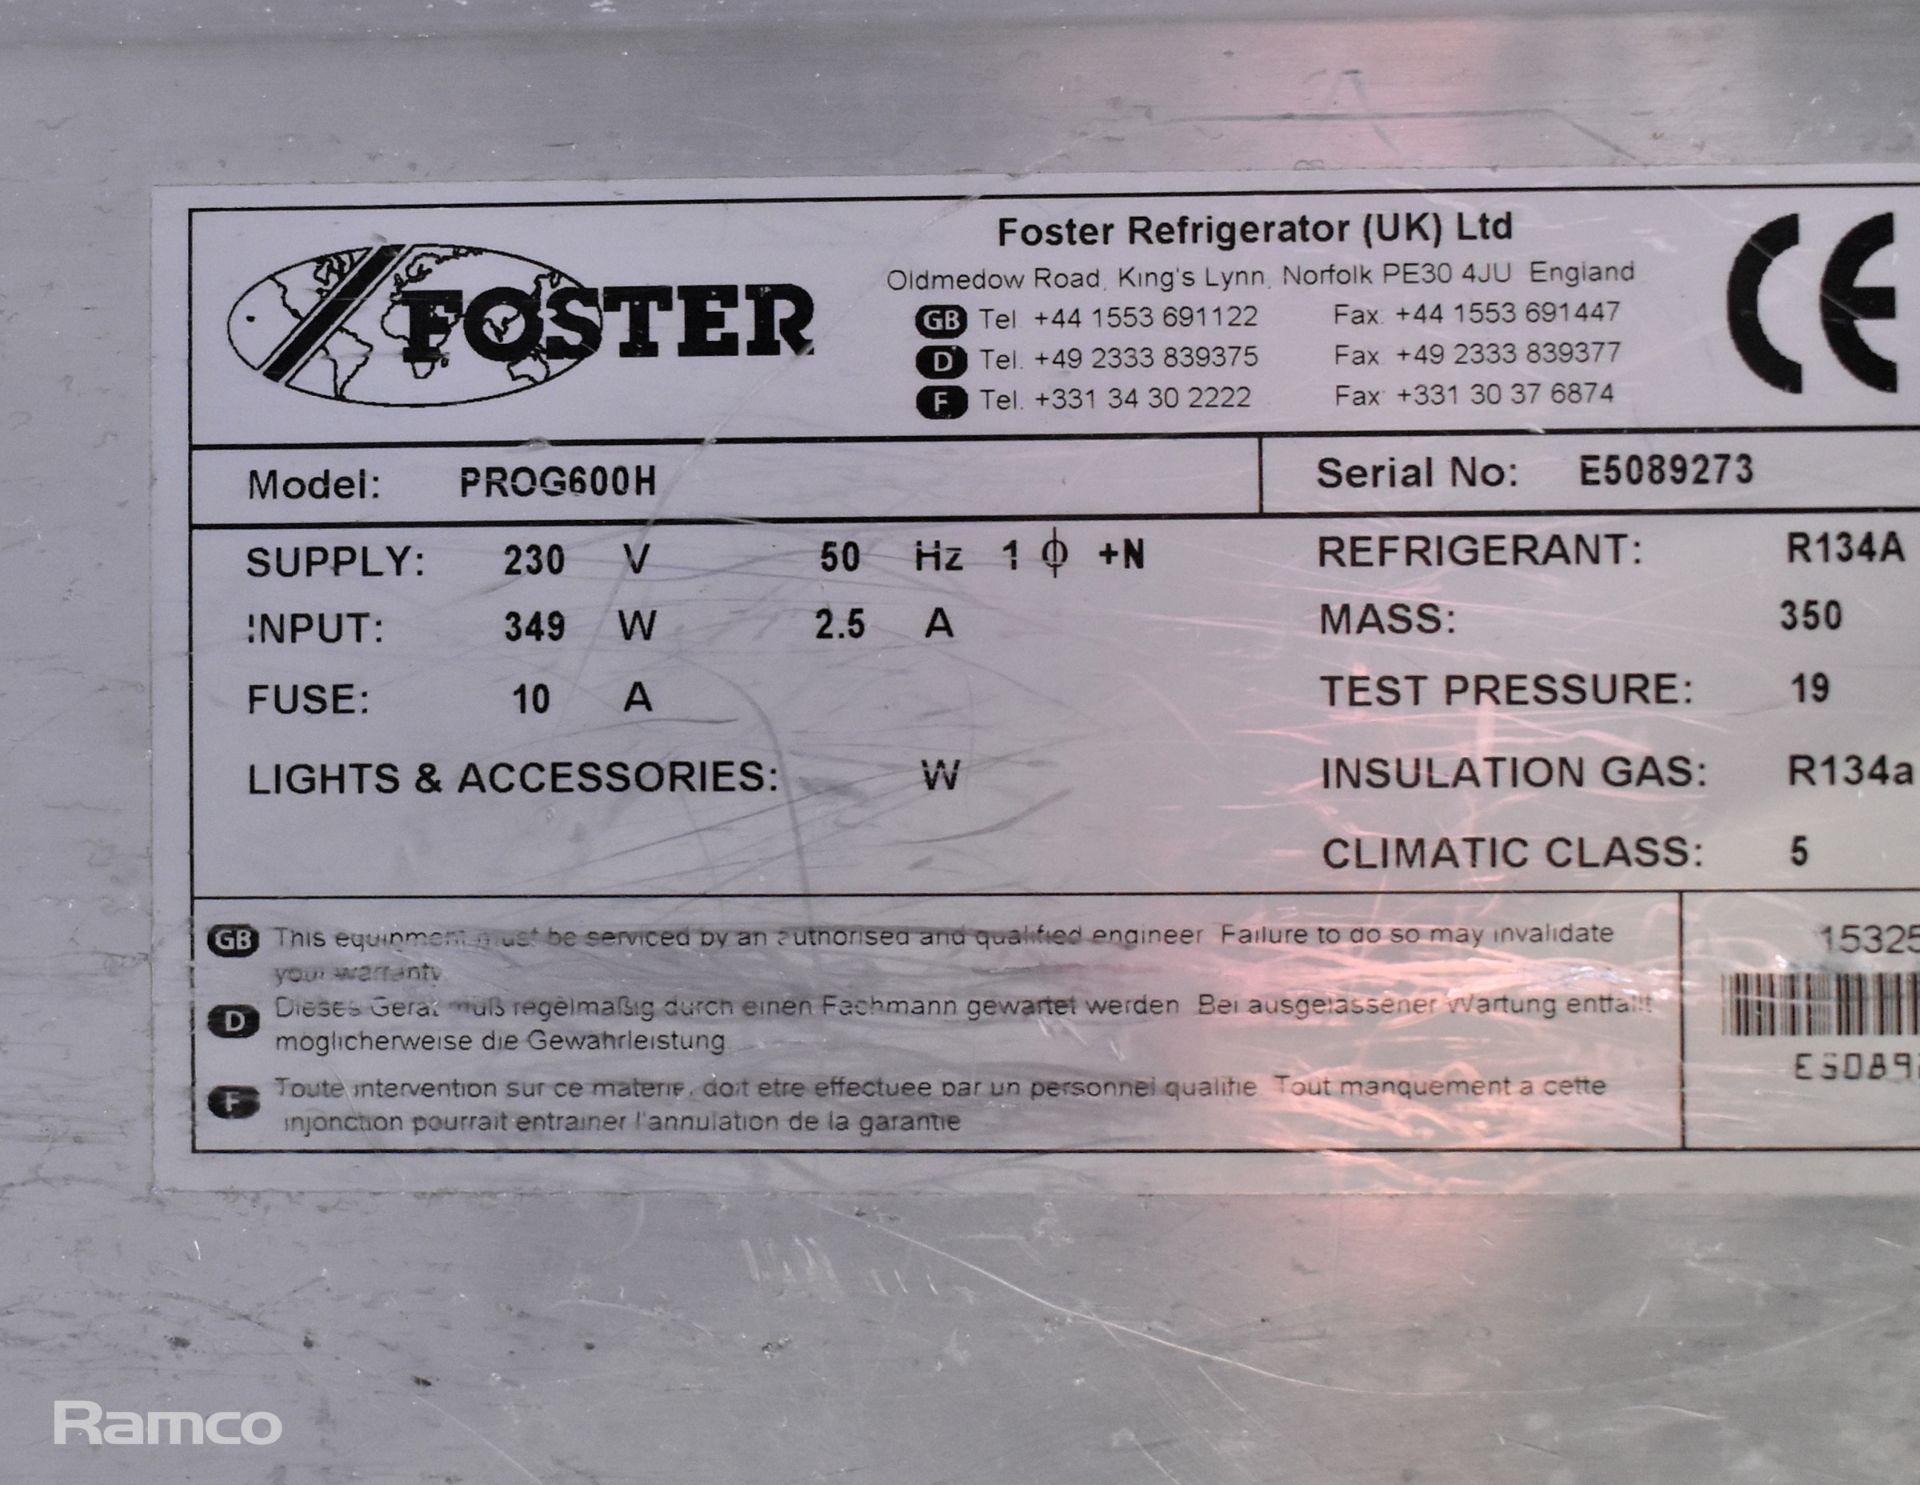 Foster PROG600H Stainless steel, single, upright refrigerator - W 700 x D 820 x H 2065mm - Image 7 of 7